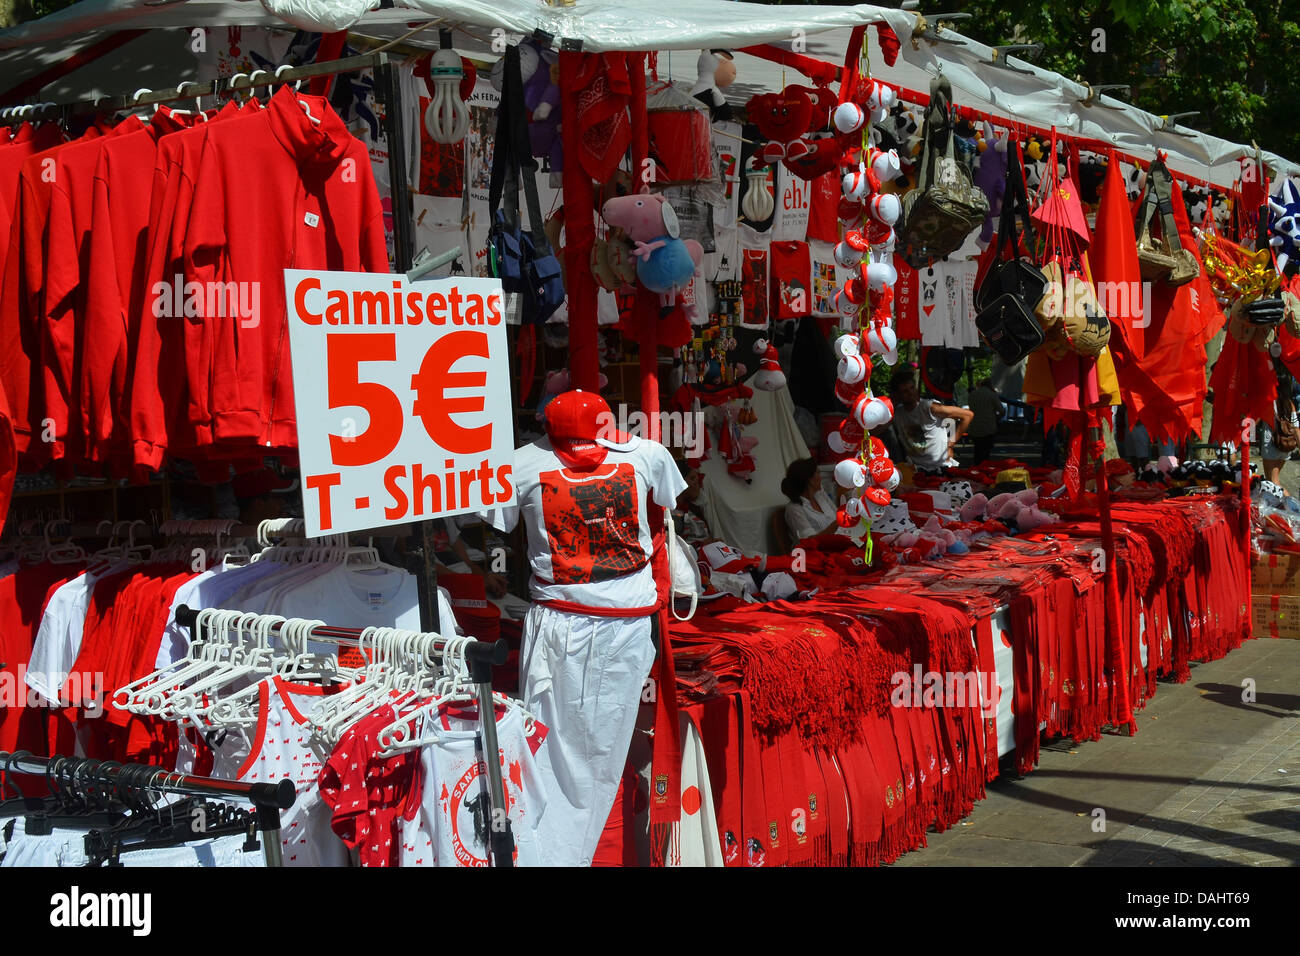 San Fermin festival merchandise and costumes for sale in Pamplona, Spain  Stock Photo - Alamy